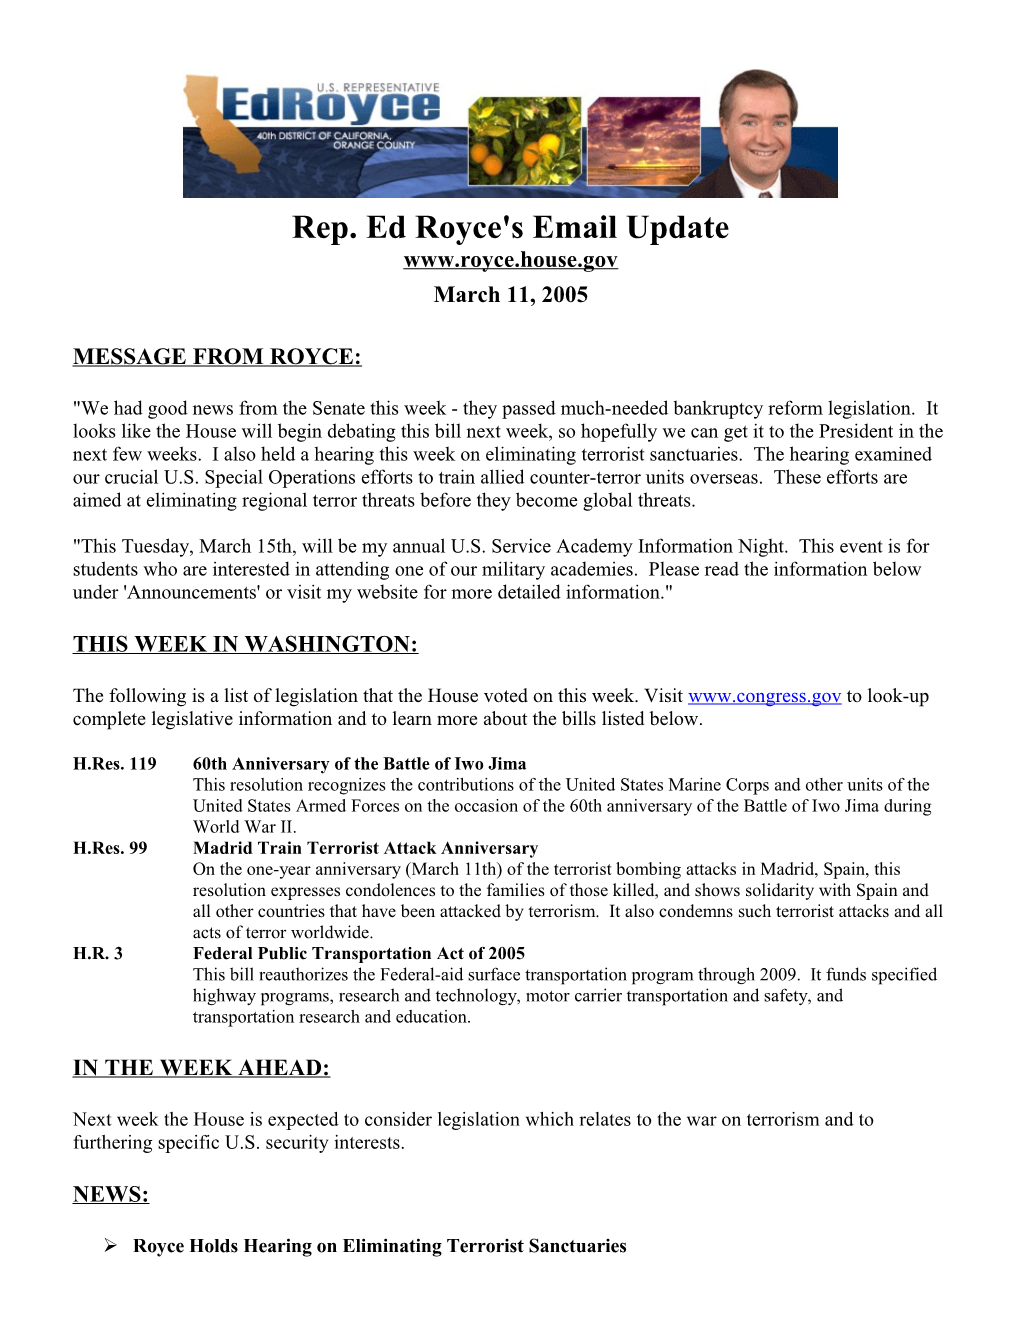 Rep. Ed Royce's Email Update s1